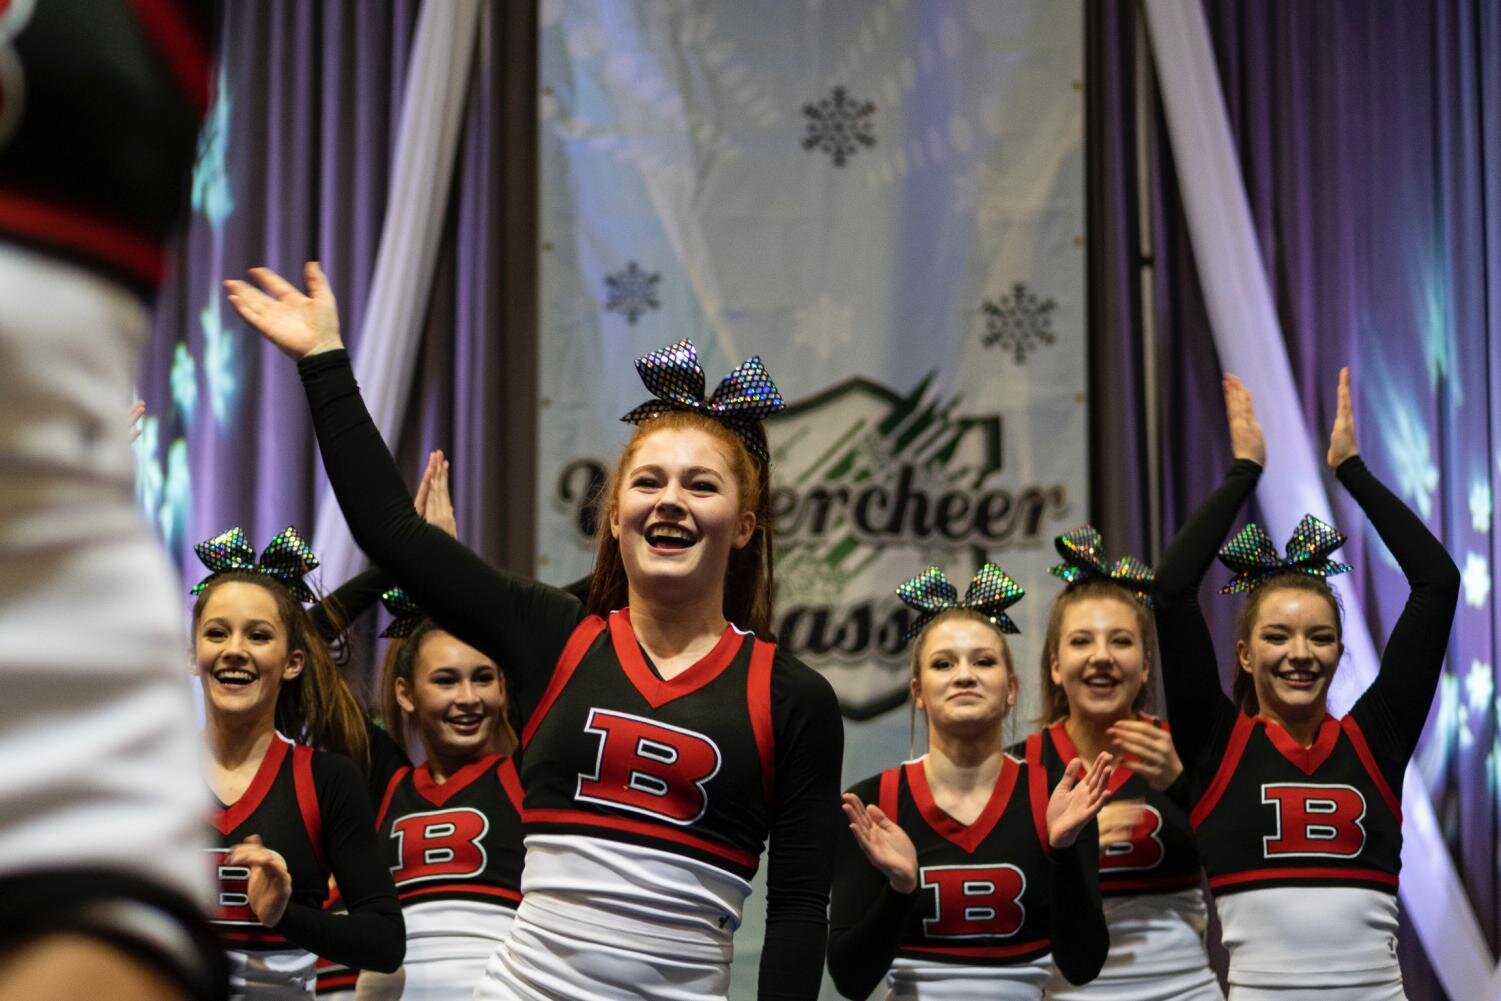 Senior Avery Miller waves to the crowd at the Winter Cheer Classic earlier this year. Miller plans on being a base for SDSU cheer team this fall.